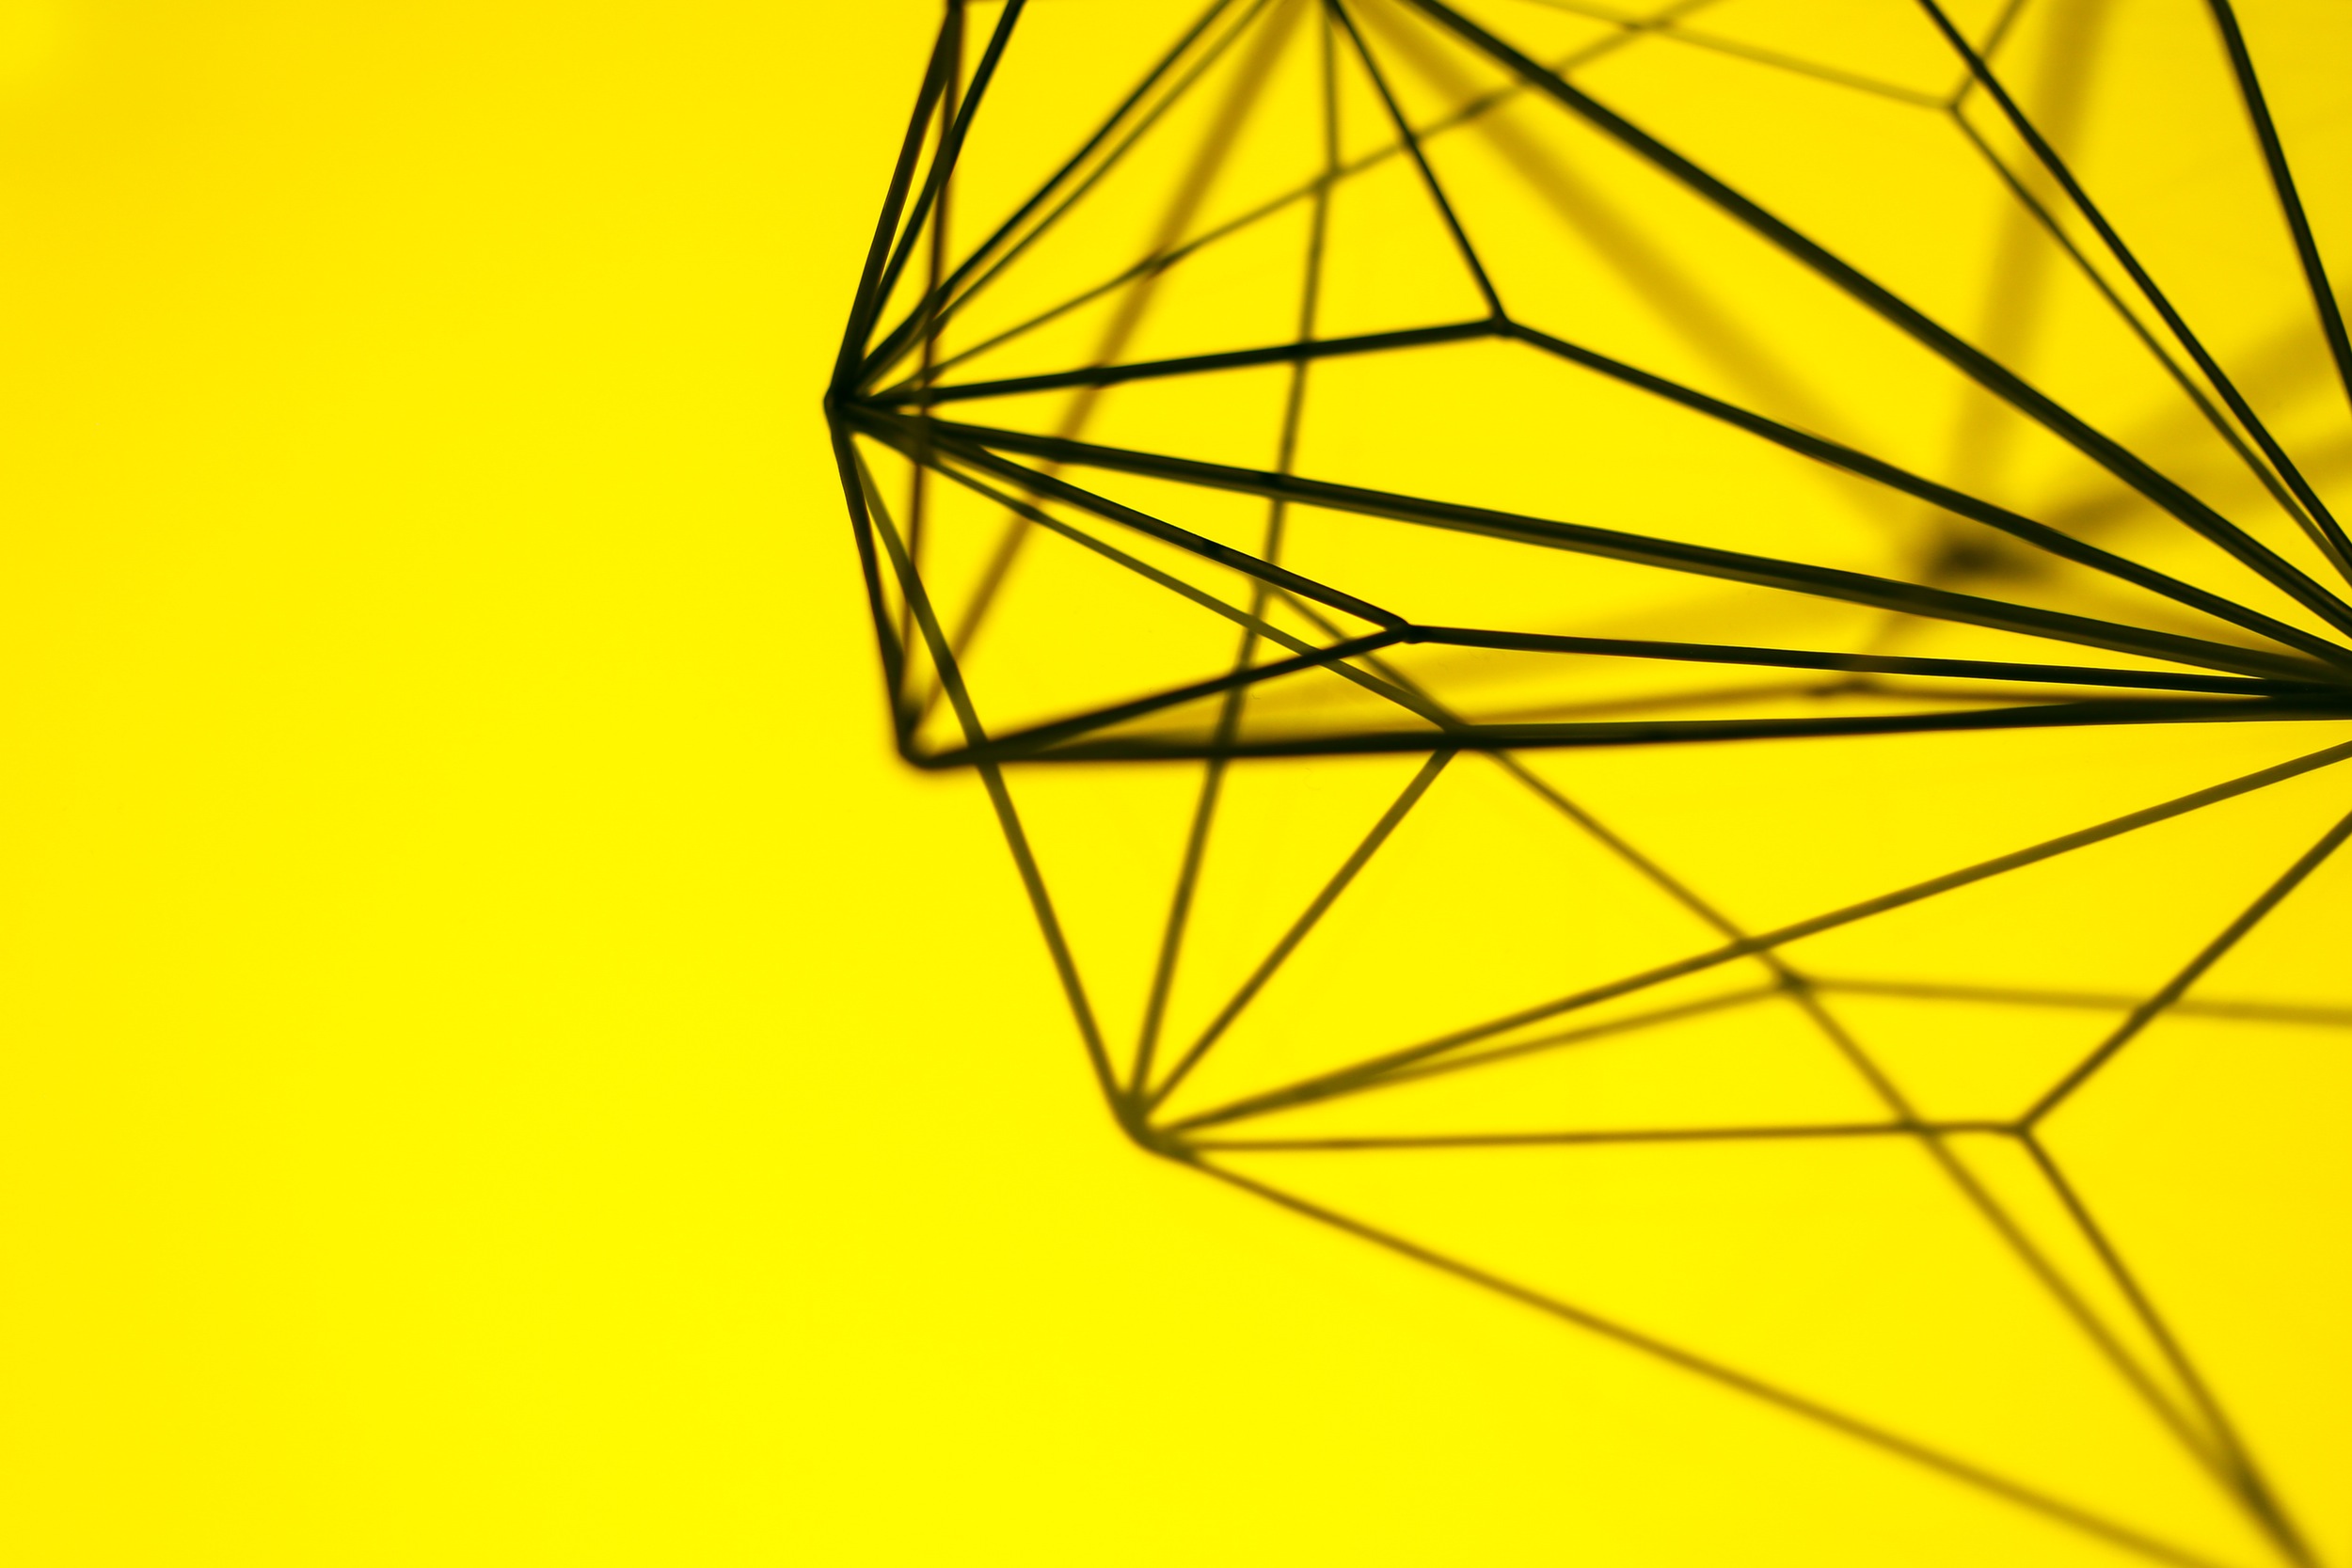 designed-metal-wire-structure-on-yellow-background